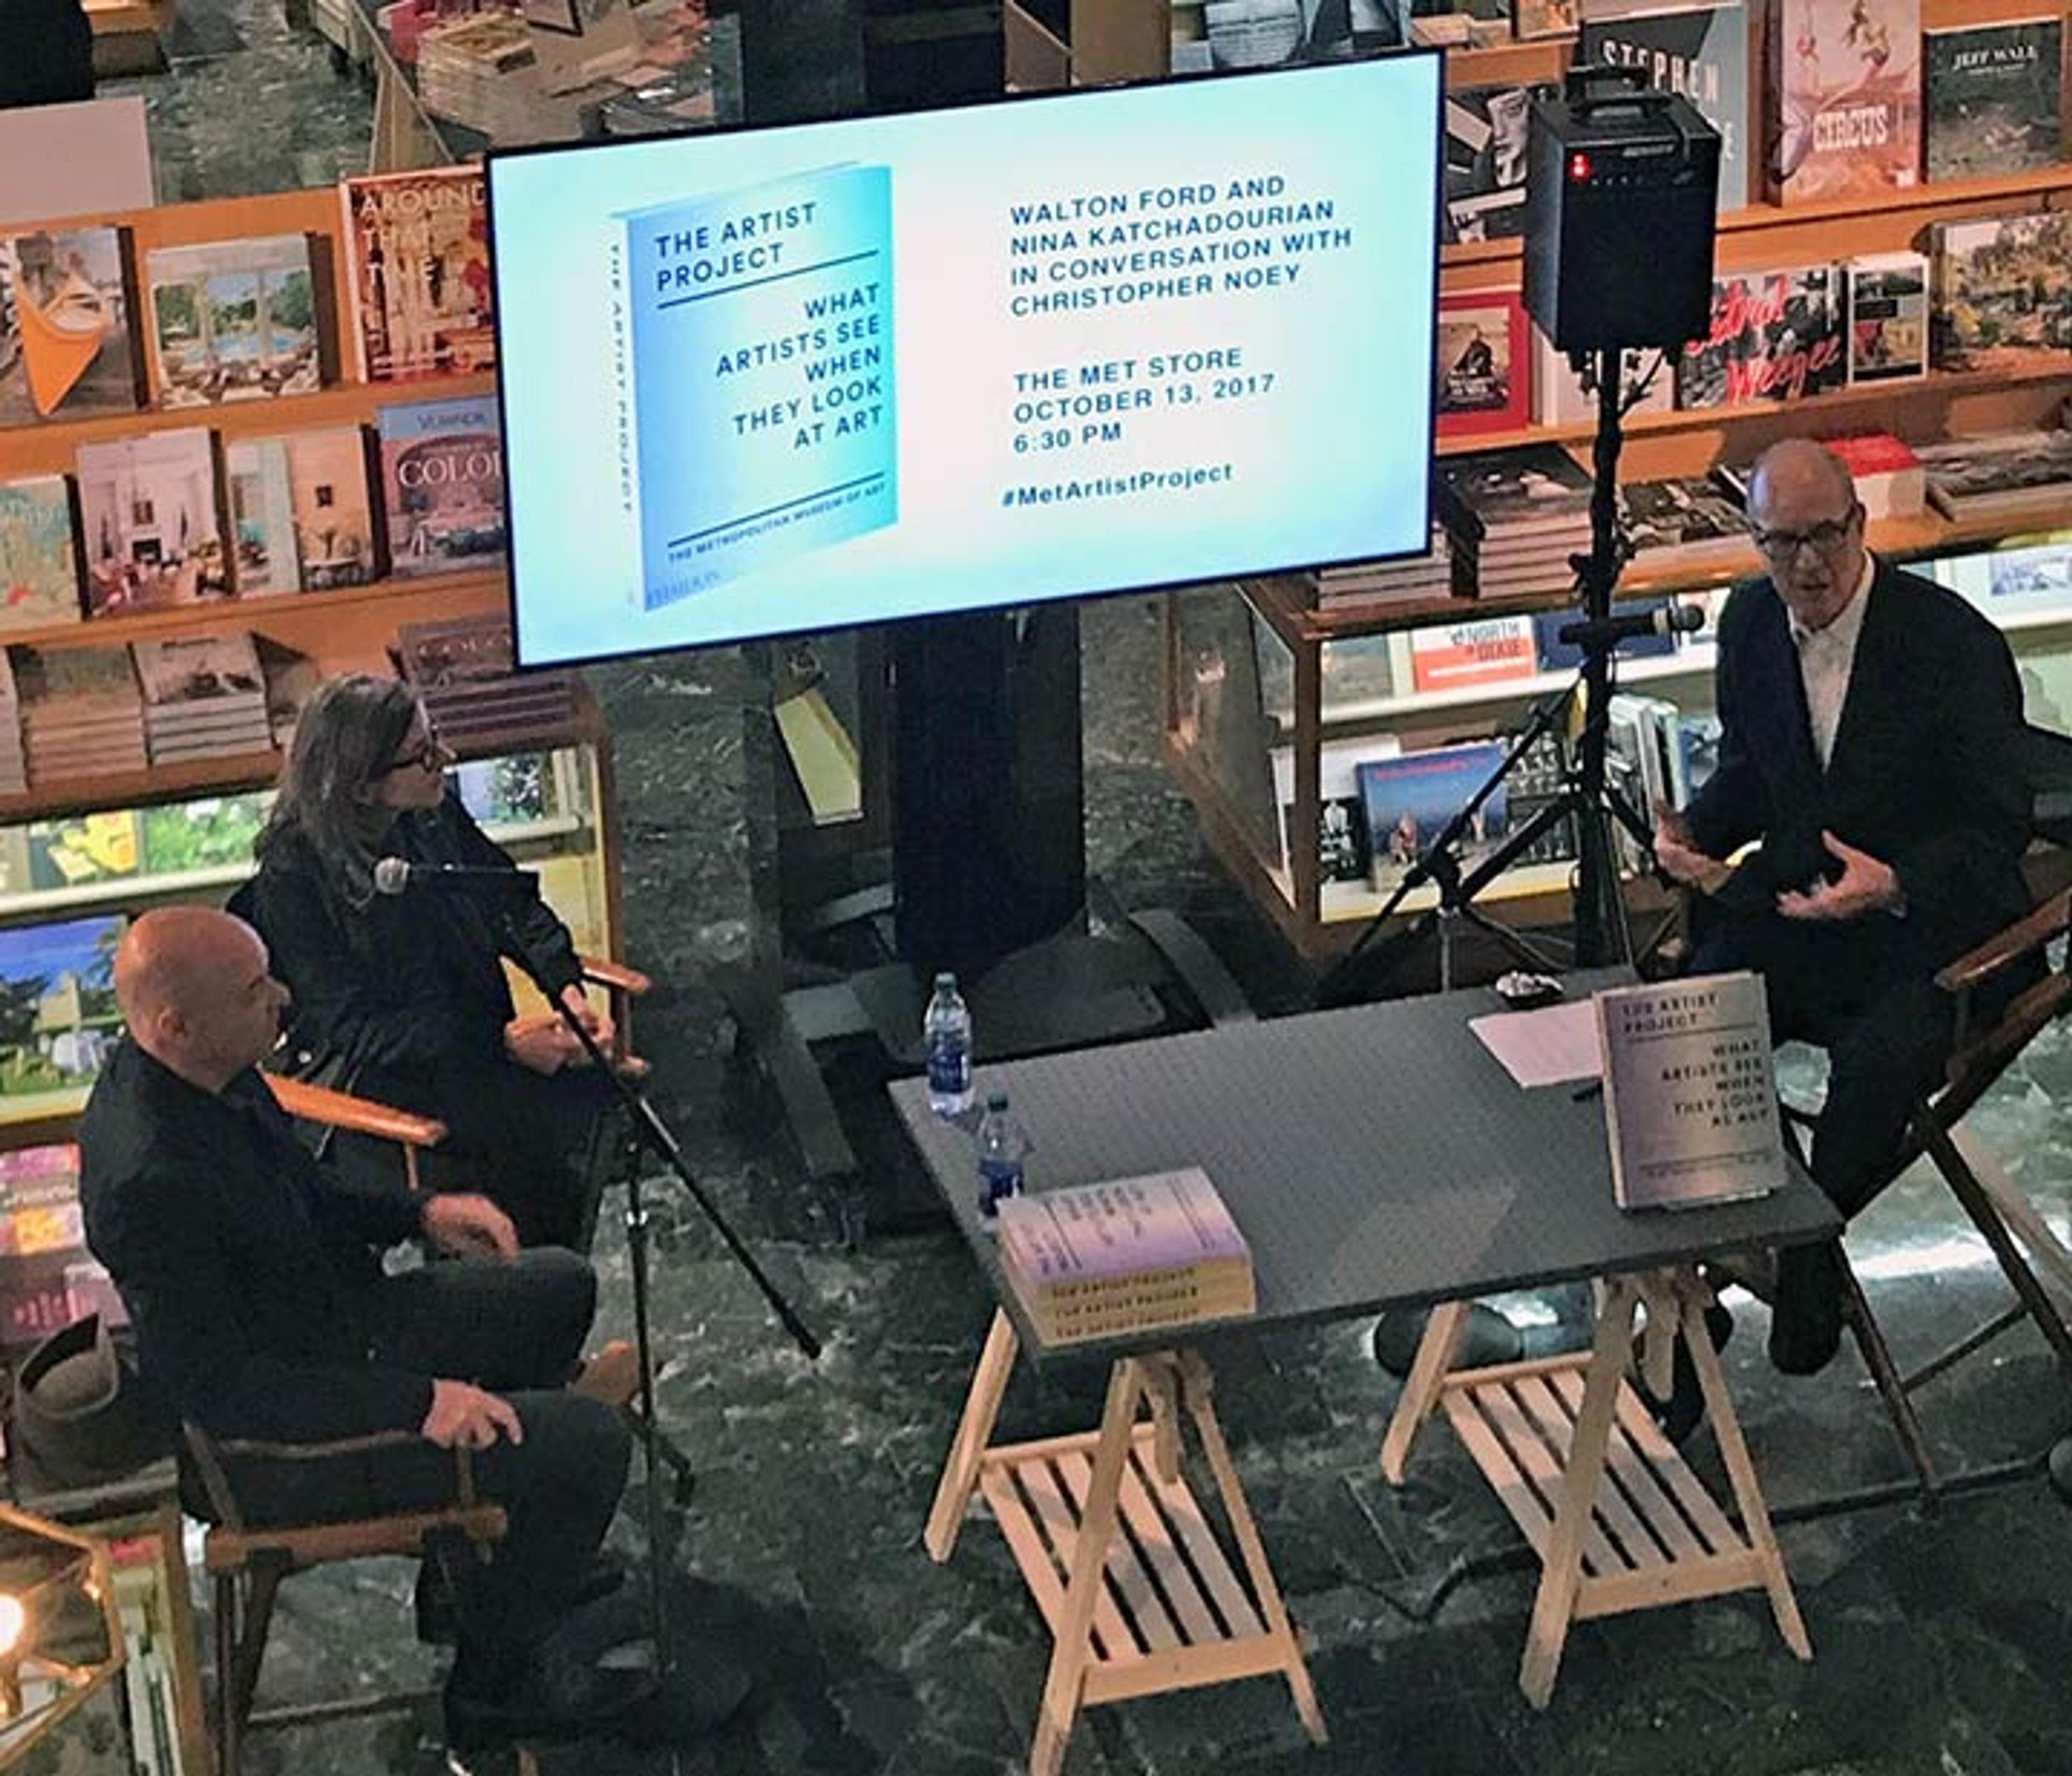 Three people having a conversation at a table in the Met Store in front of a projection screen